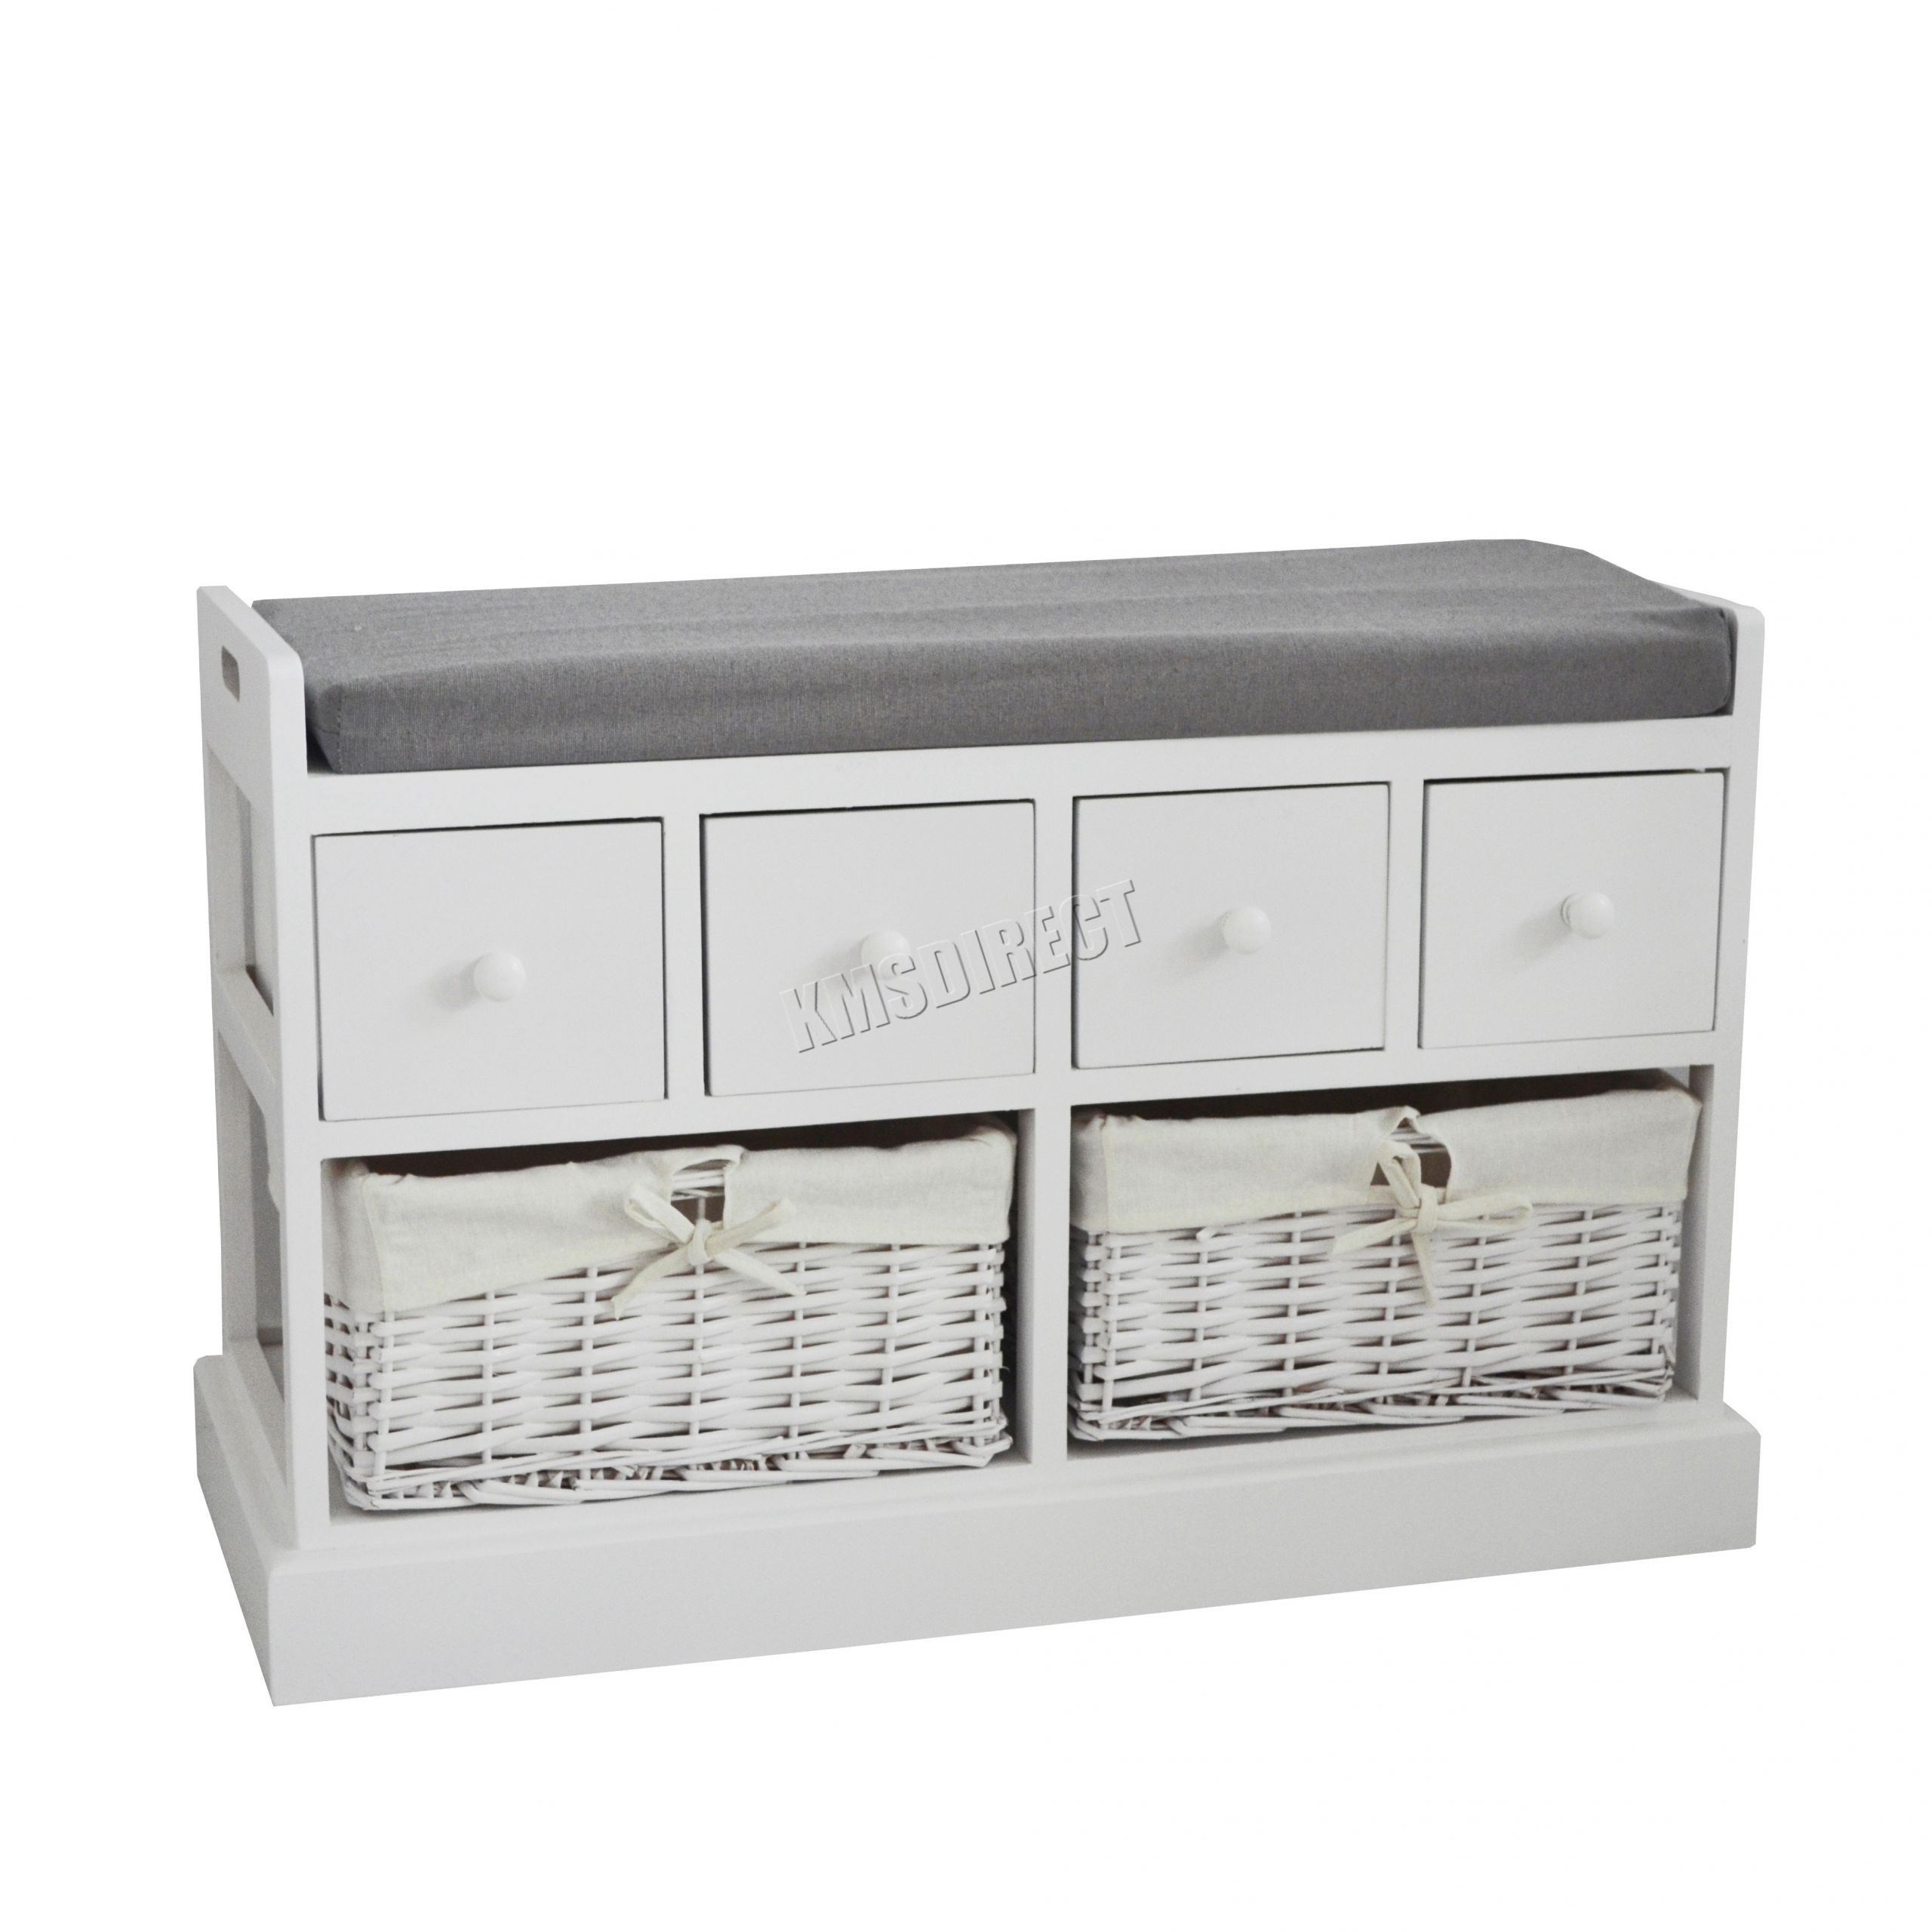 White Storage Bench With Drawers
 FoxHunter Wooden Storage Bench Seat with 2 Wicker Basket